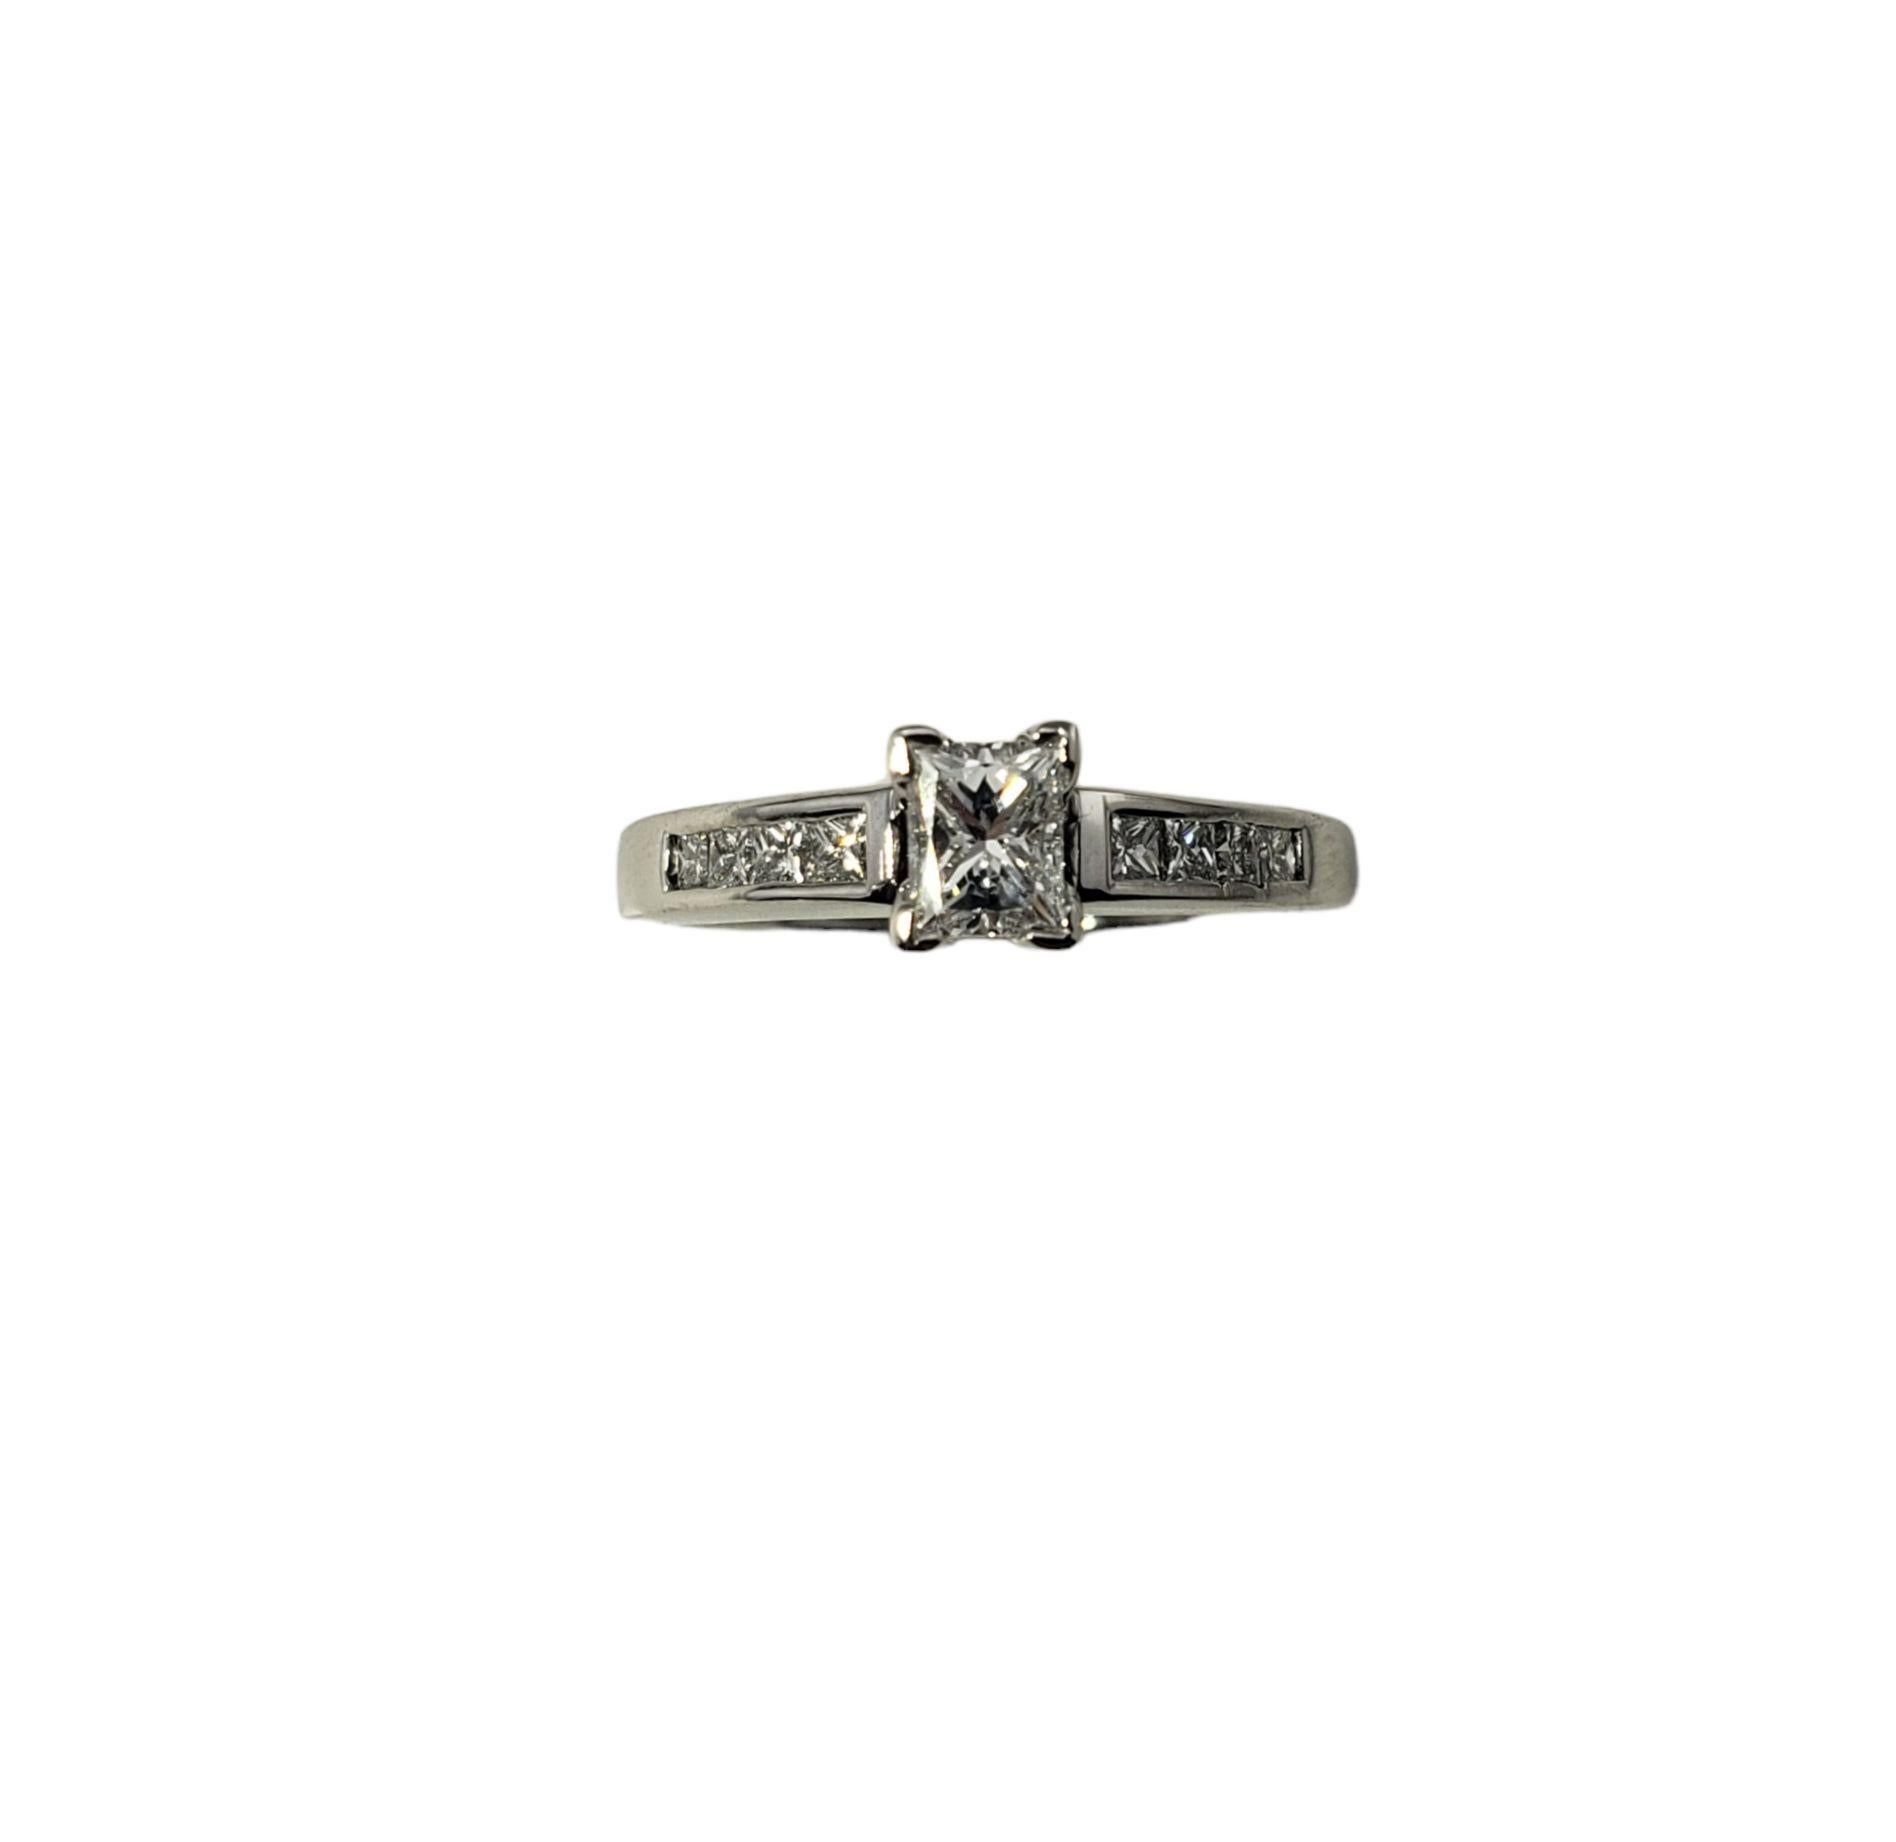 Vintage 14 Karat White Gold Princess Cut Diamond Engagement Ring Size 5.75-

This sparkling engagement ring features nine princess cut diamonds (center: .25 ct.) set in classic 14K white gold. Shank: 2 mm.

Approximate total diamond weight: .41